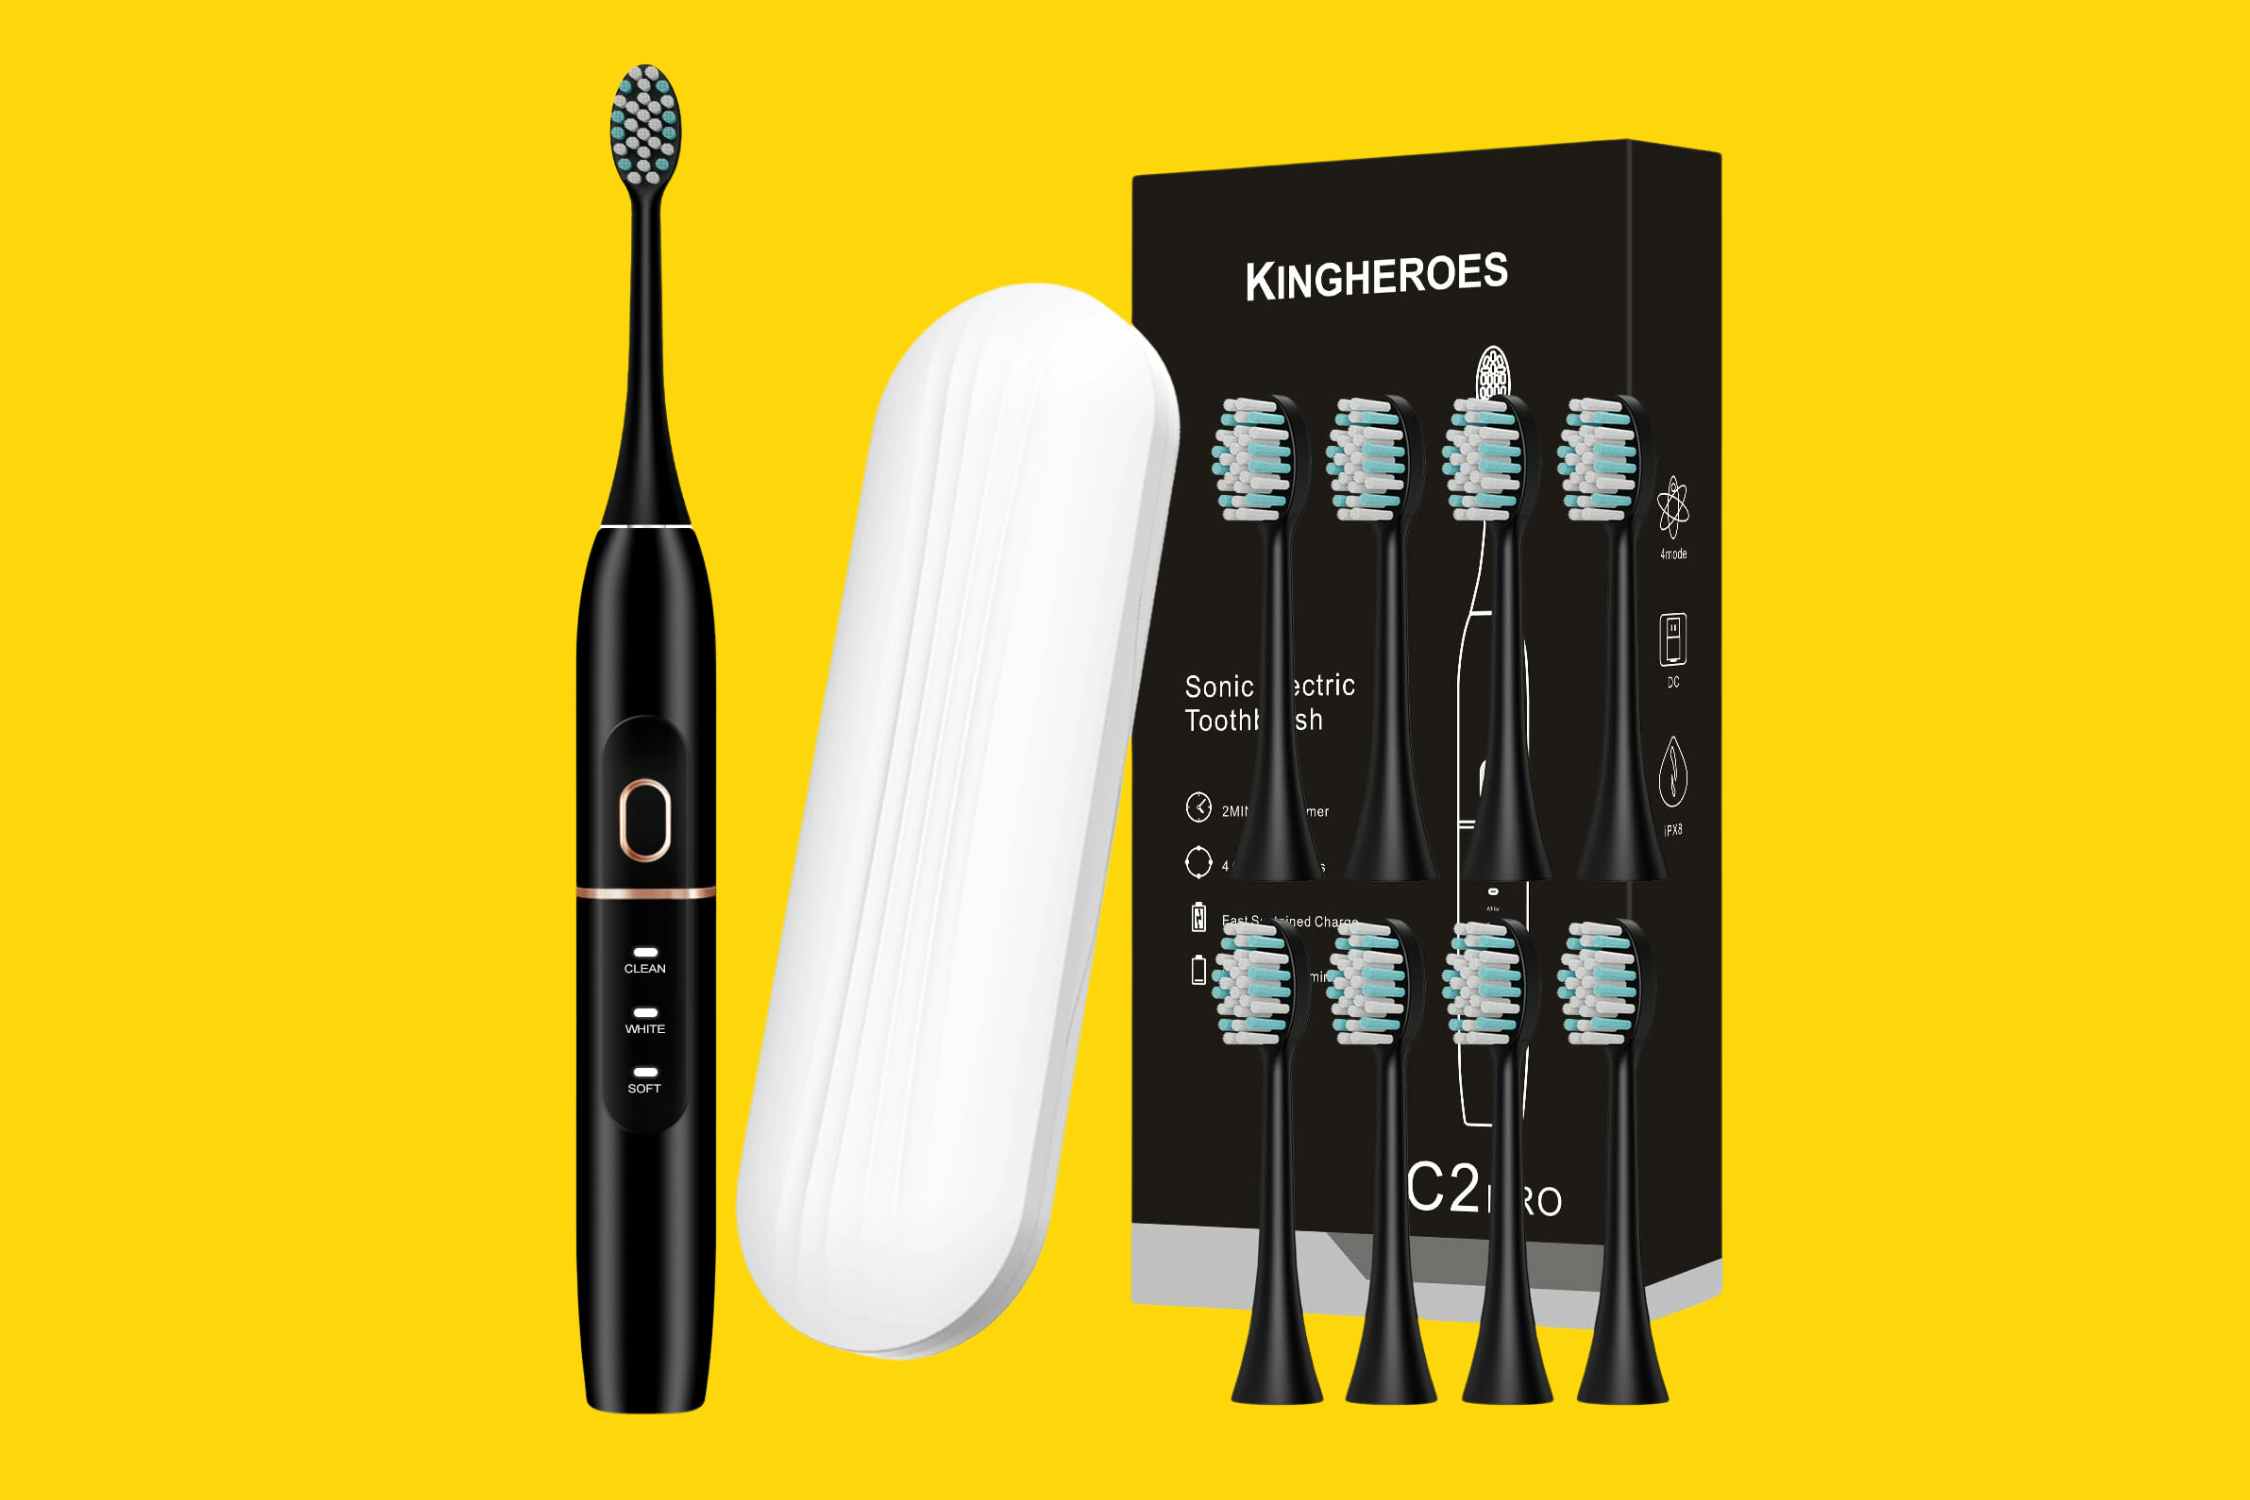 Electric Toothbrush Set, Only $9.98 on Amazon (Reg. $39.99)